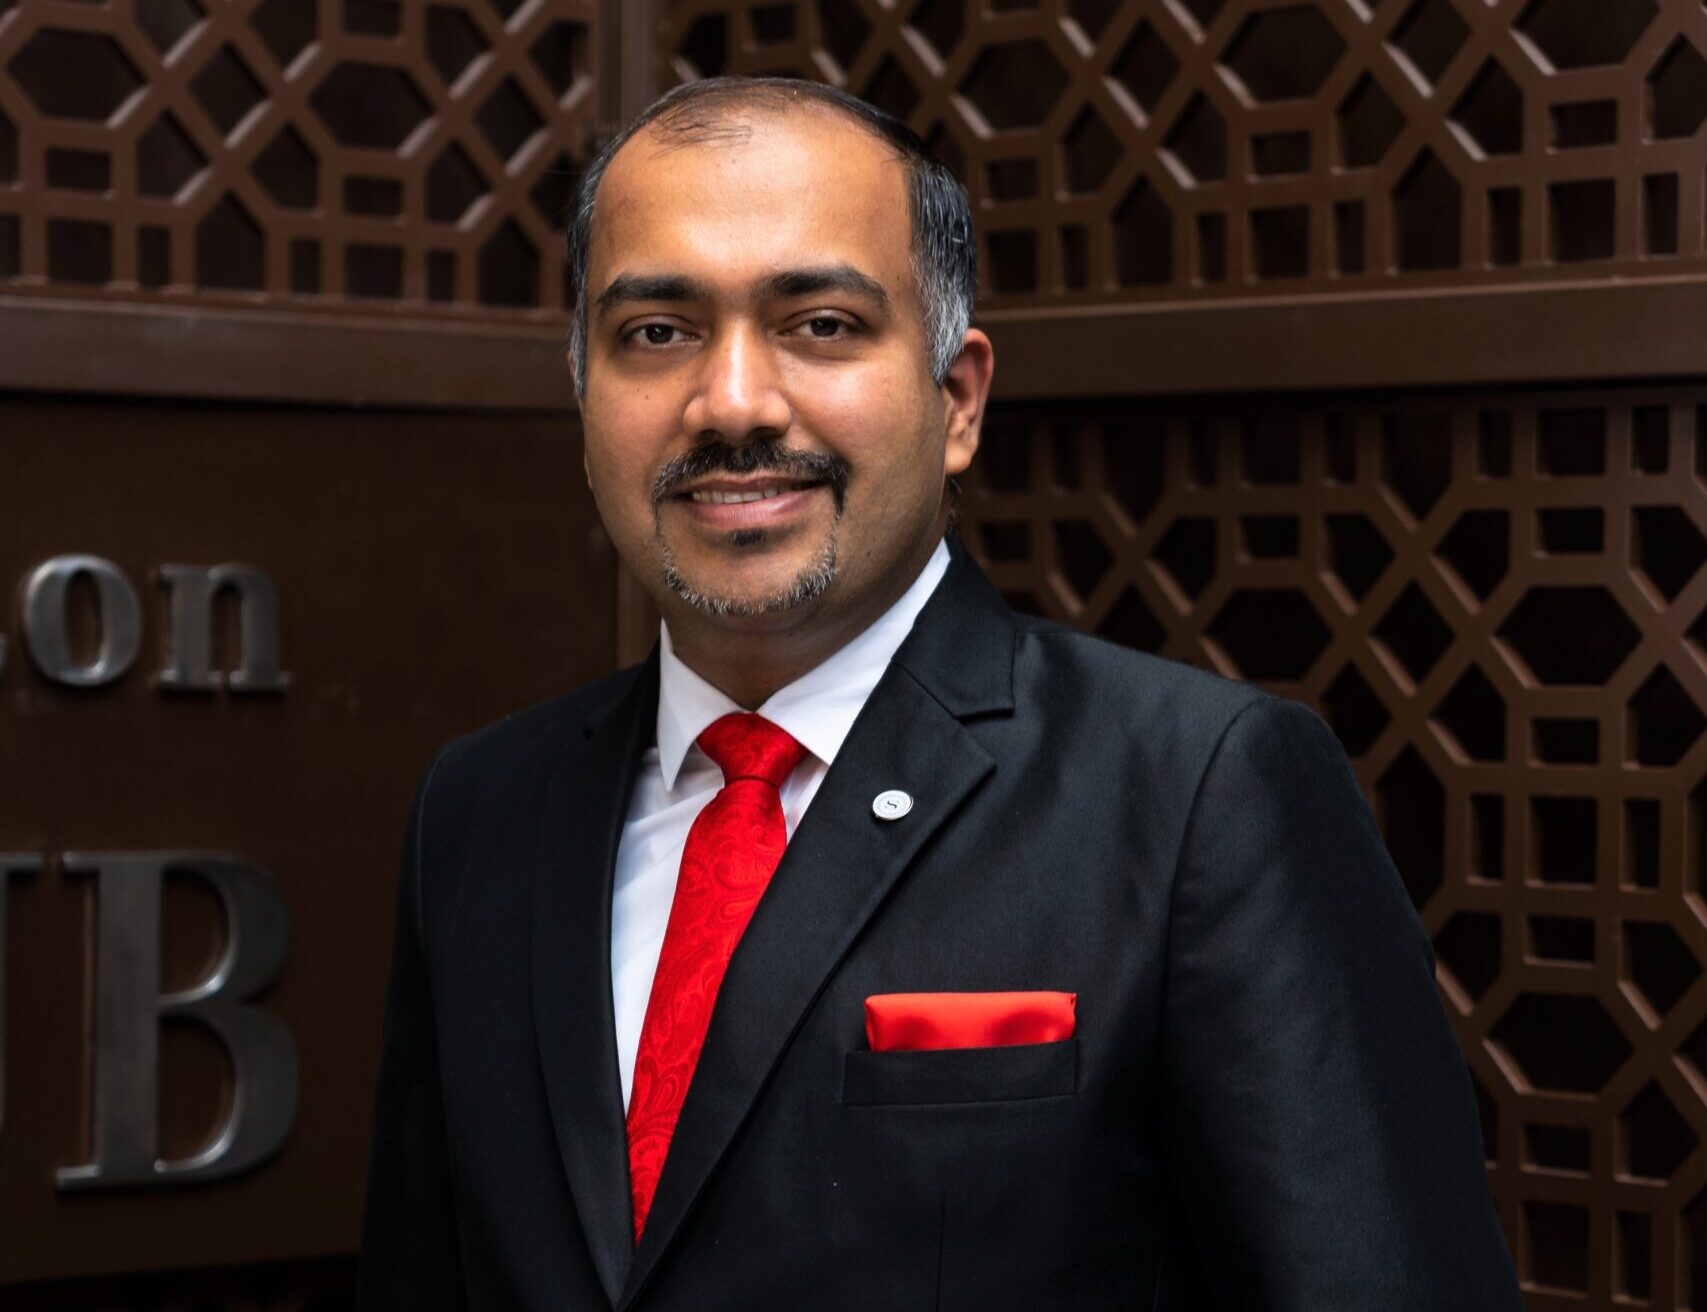 Rishabh Tandon Joins SAMHI Hotels as Cluster Director of Human Resources